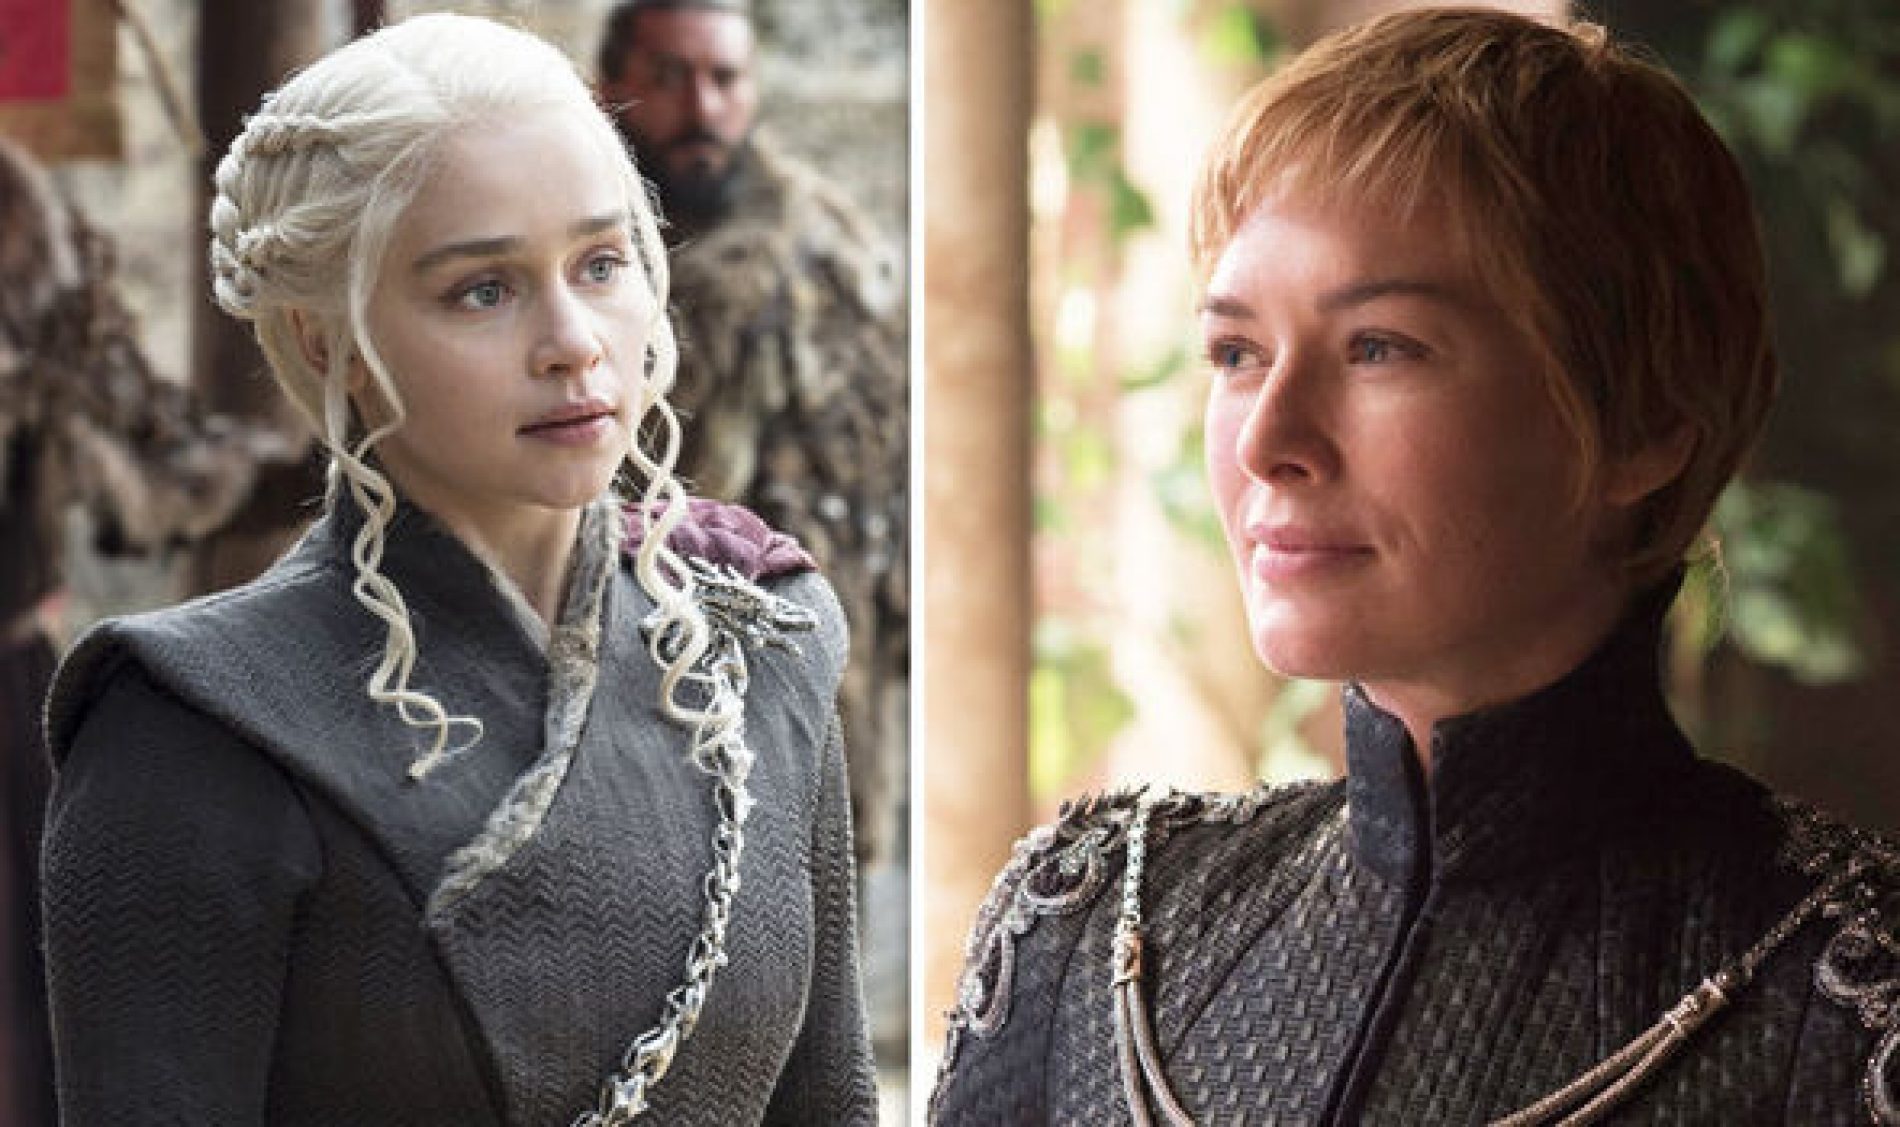 Daenerys vs. Cersei: who has the resources to win the final game of thrones?